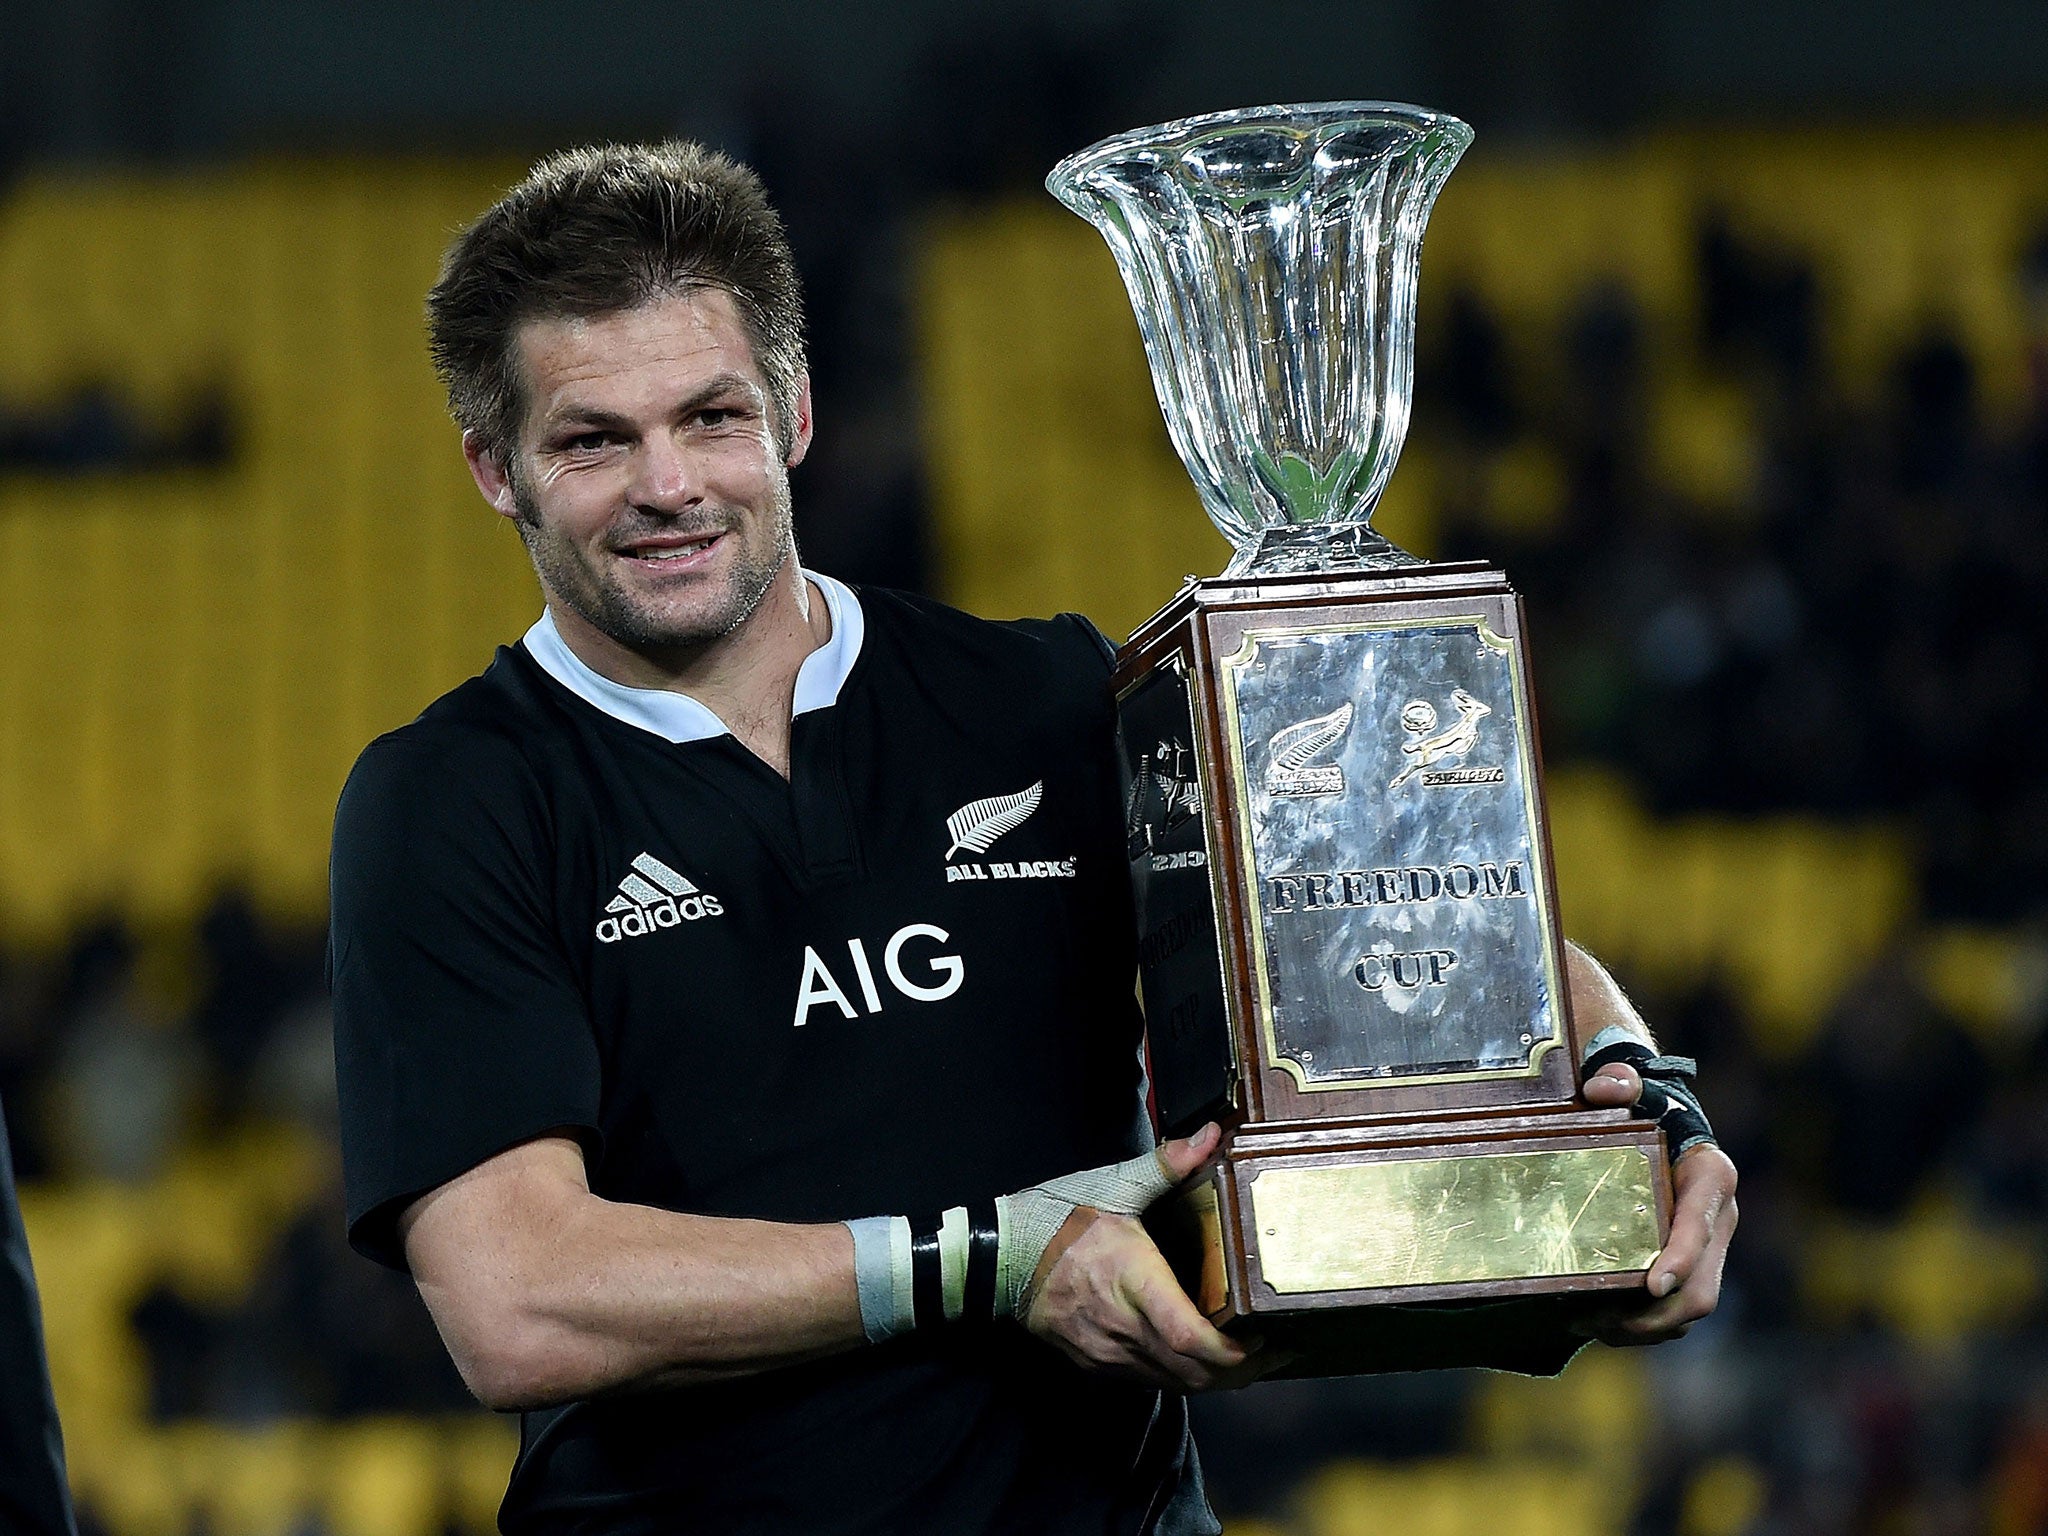 New Zealand's openside flanker captain Richie McCaw holds the Freedom Cup after their win during the Rugby Championship Test between New Zealand and South Africa